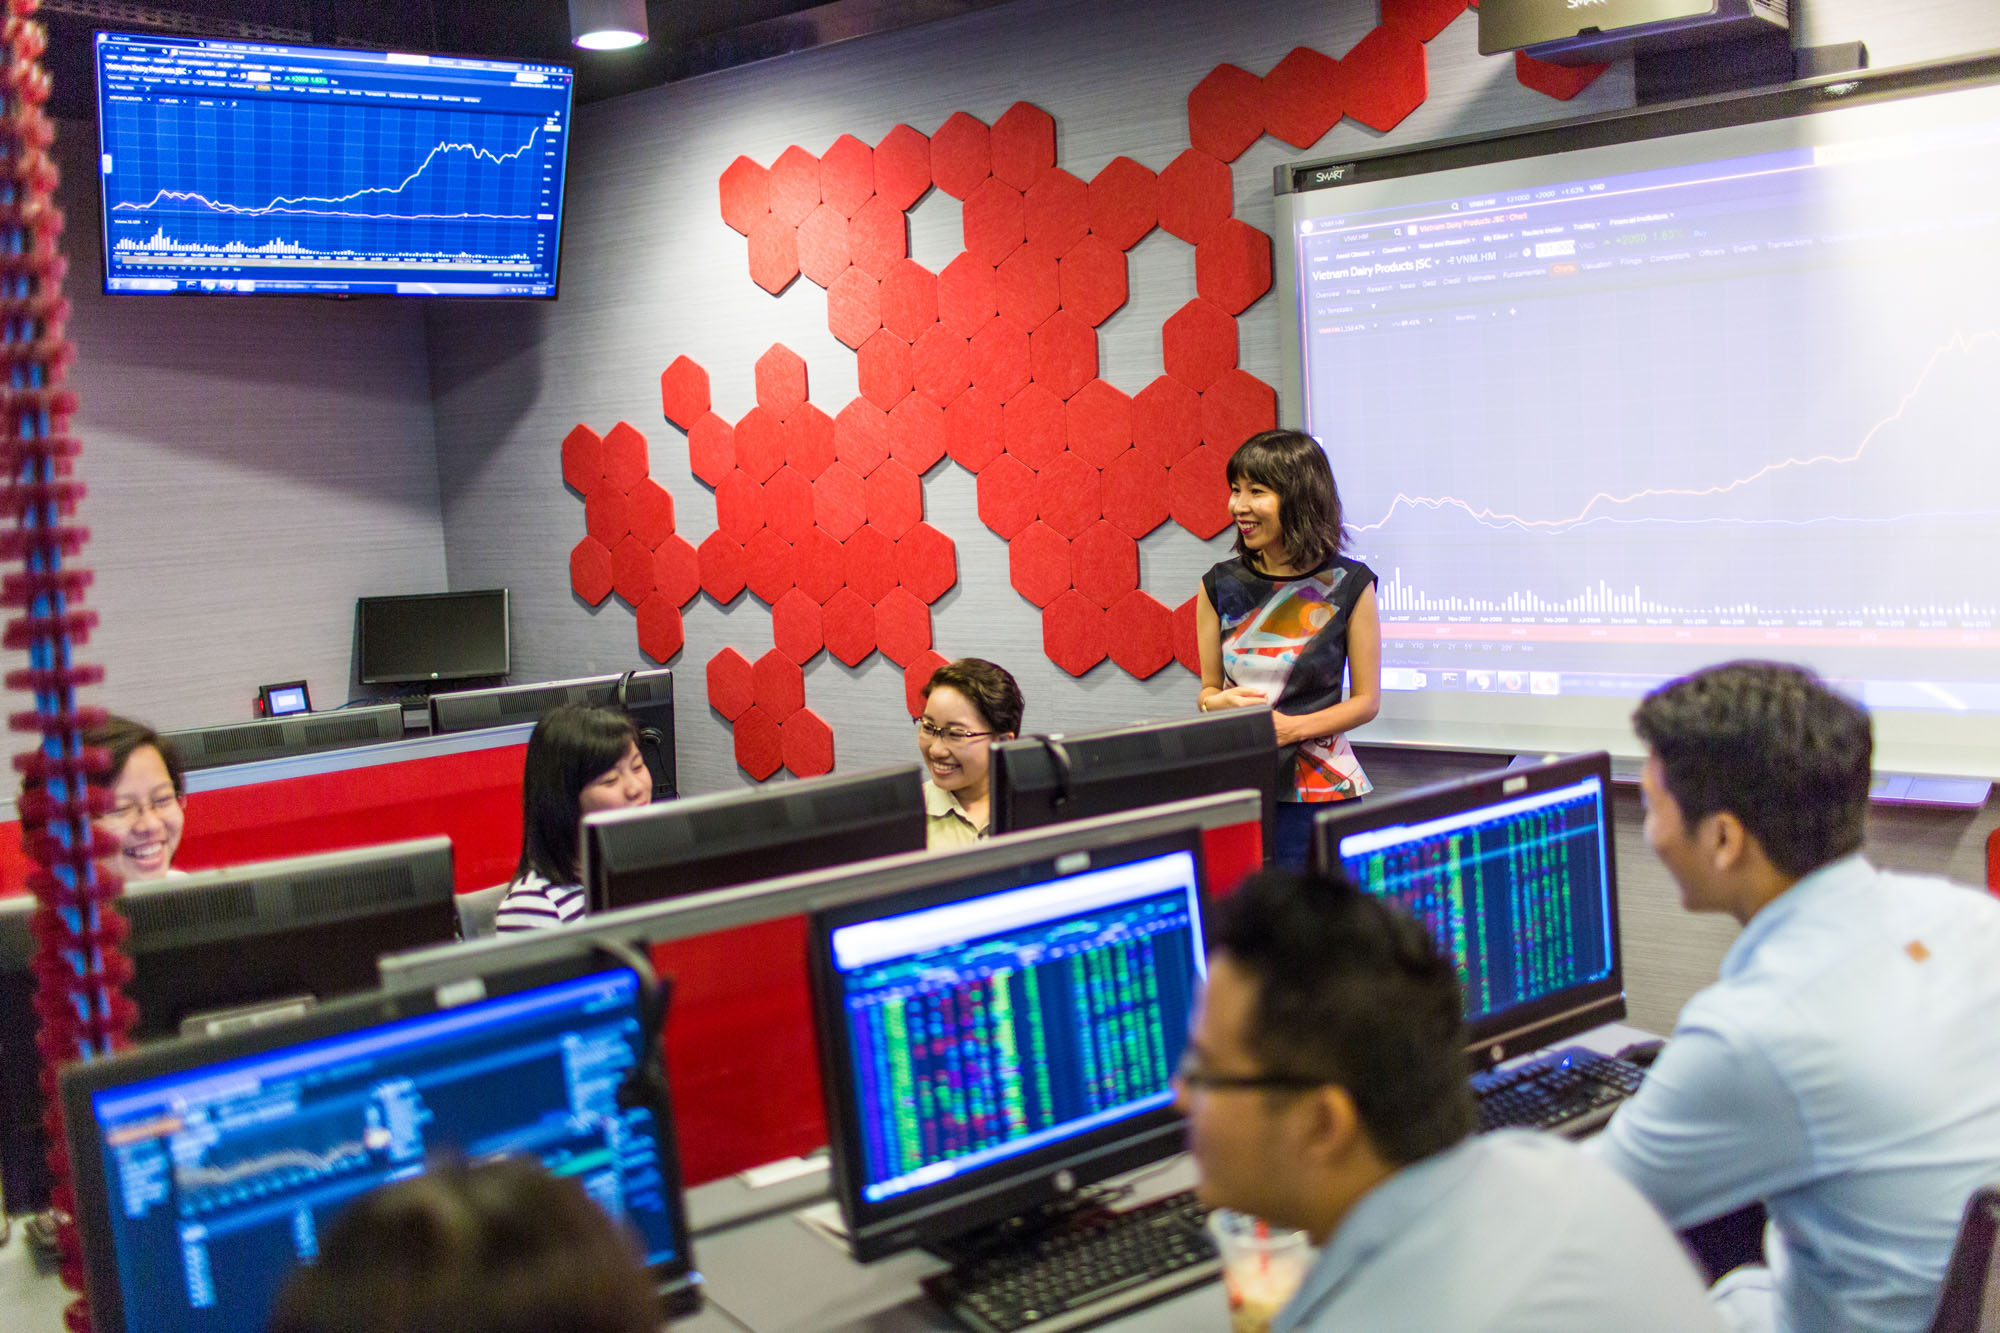 The Financial Markets Trading Lab replicates a real-world financial stock trading room.